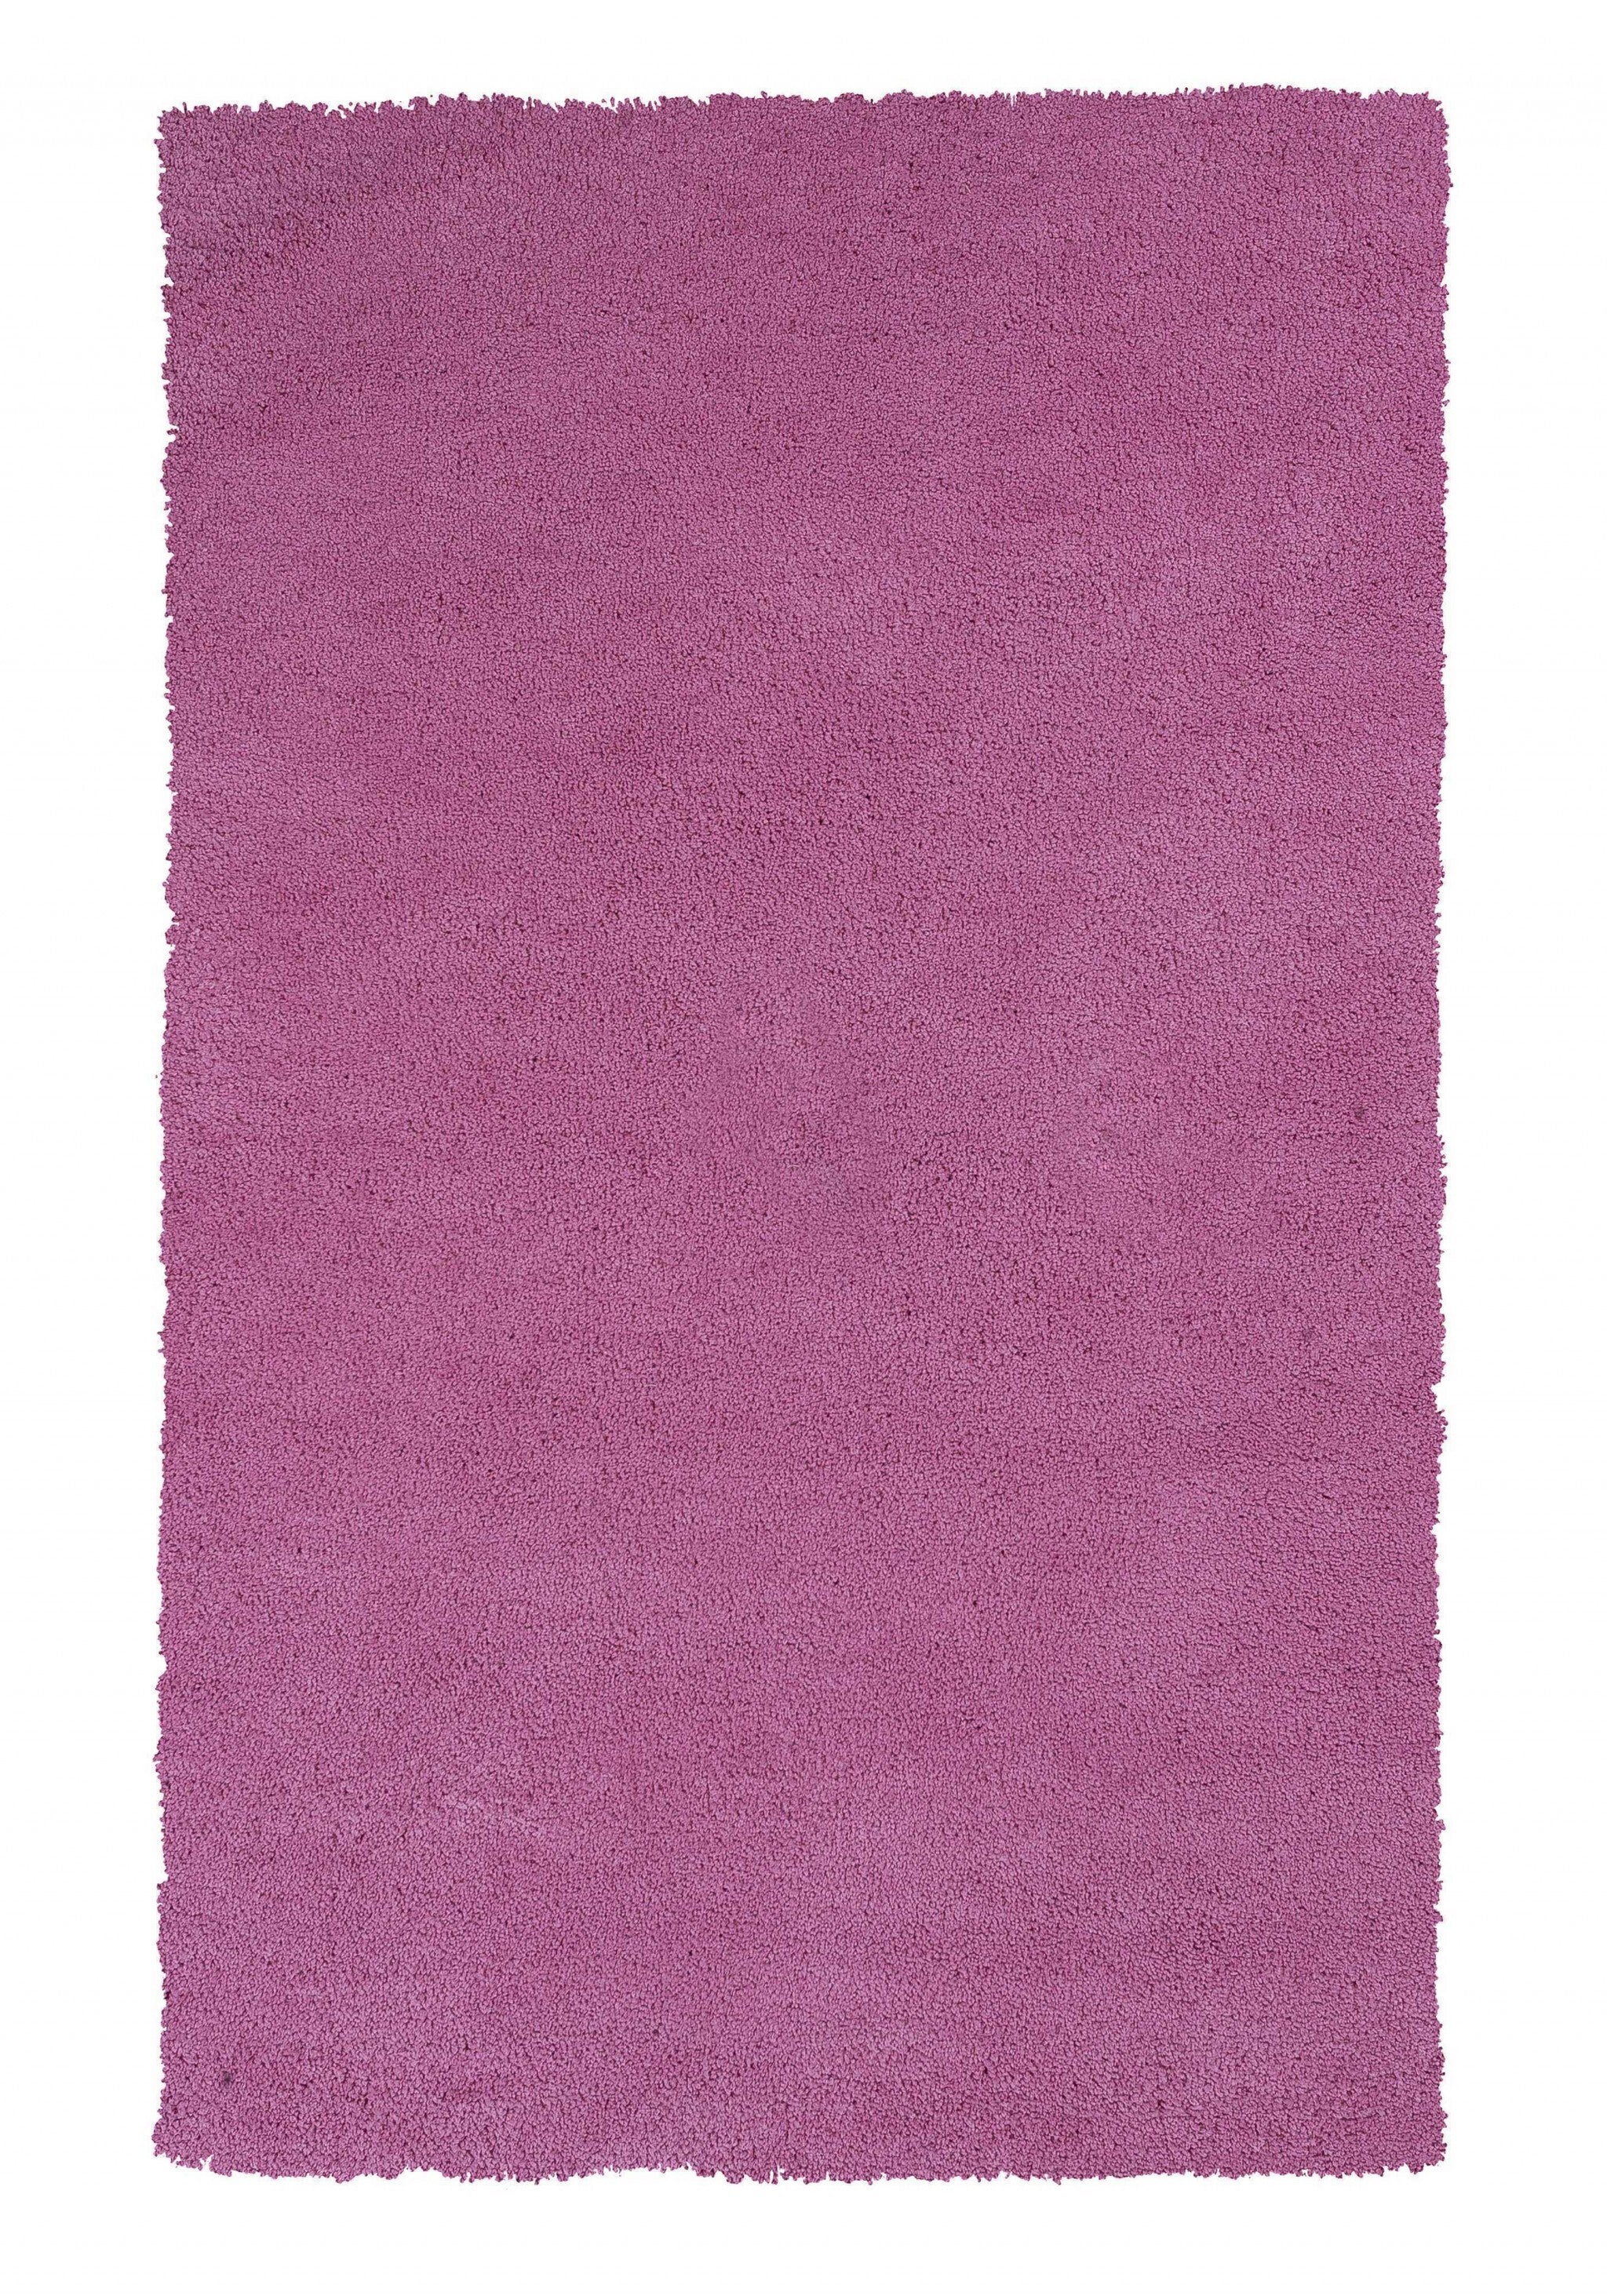 8' X 10' Polyester Hot Pink Area Rug